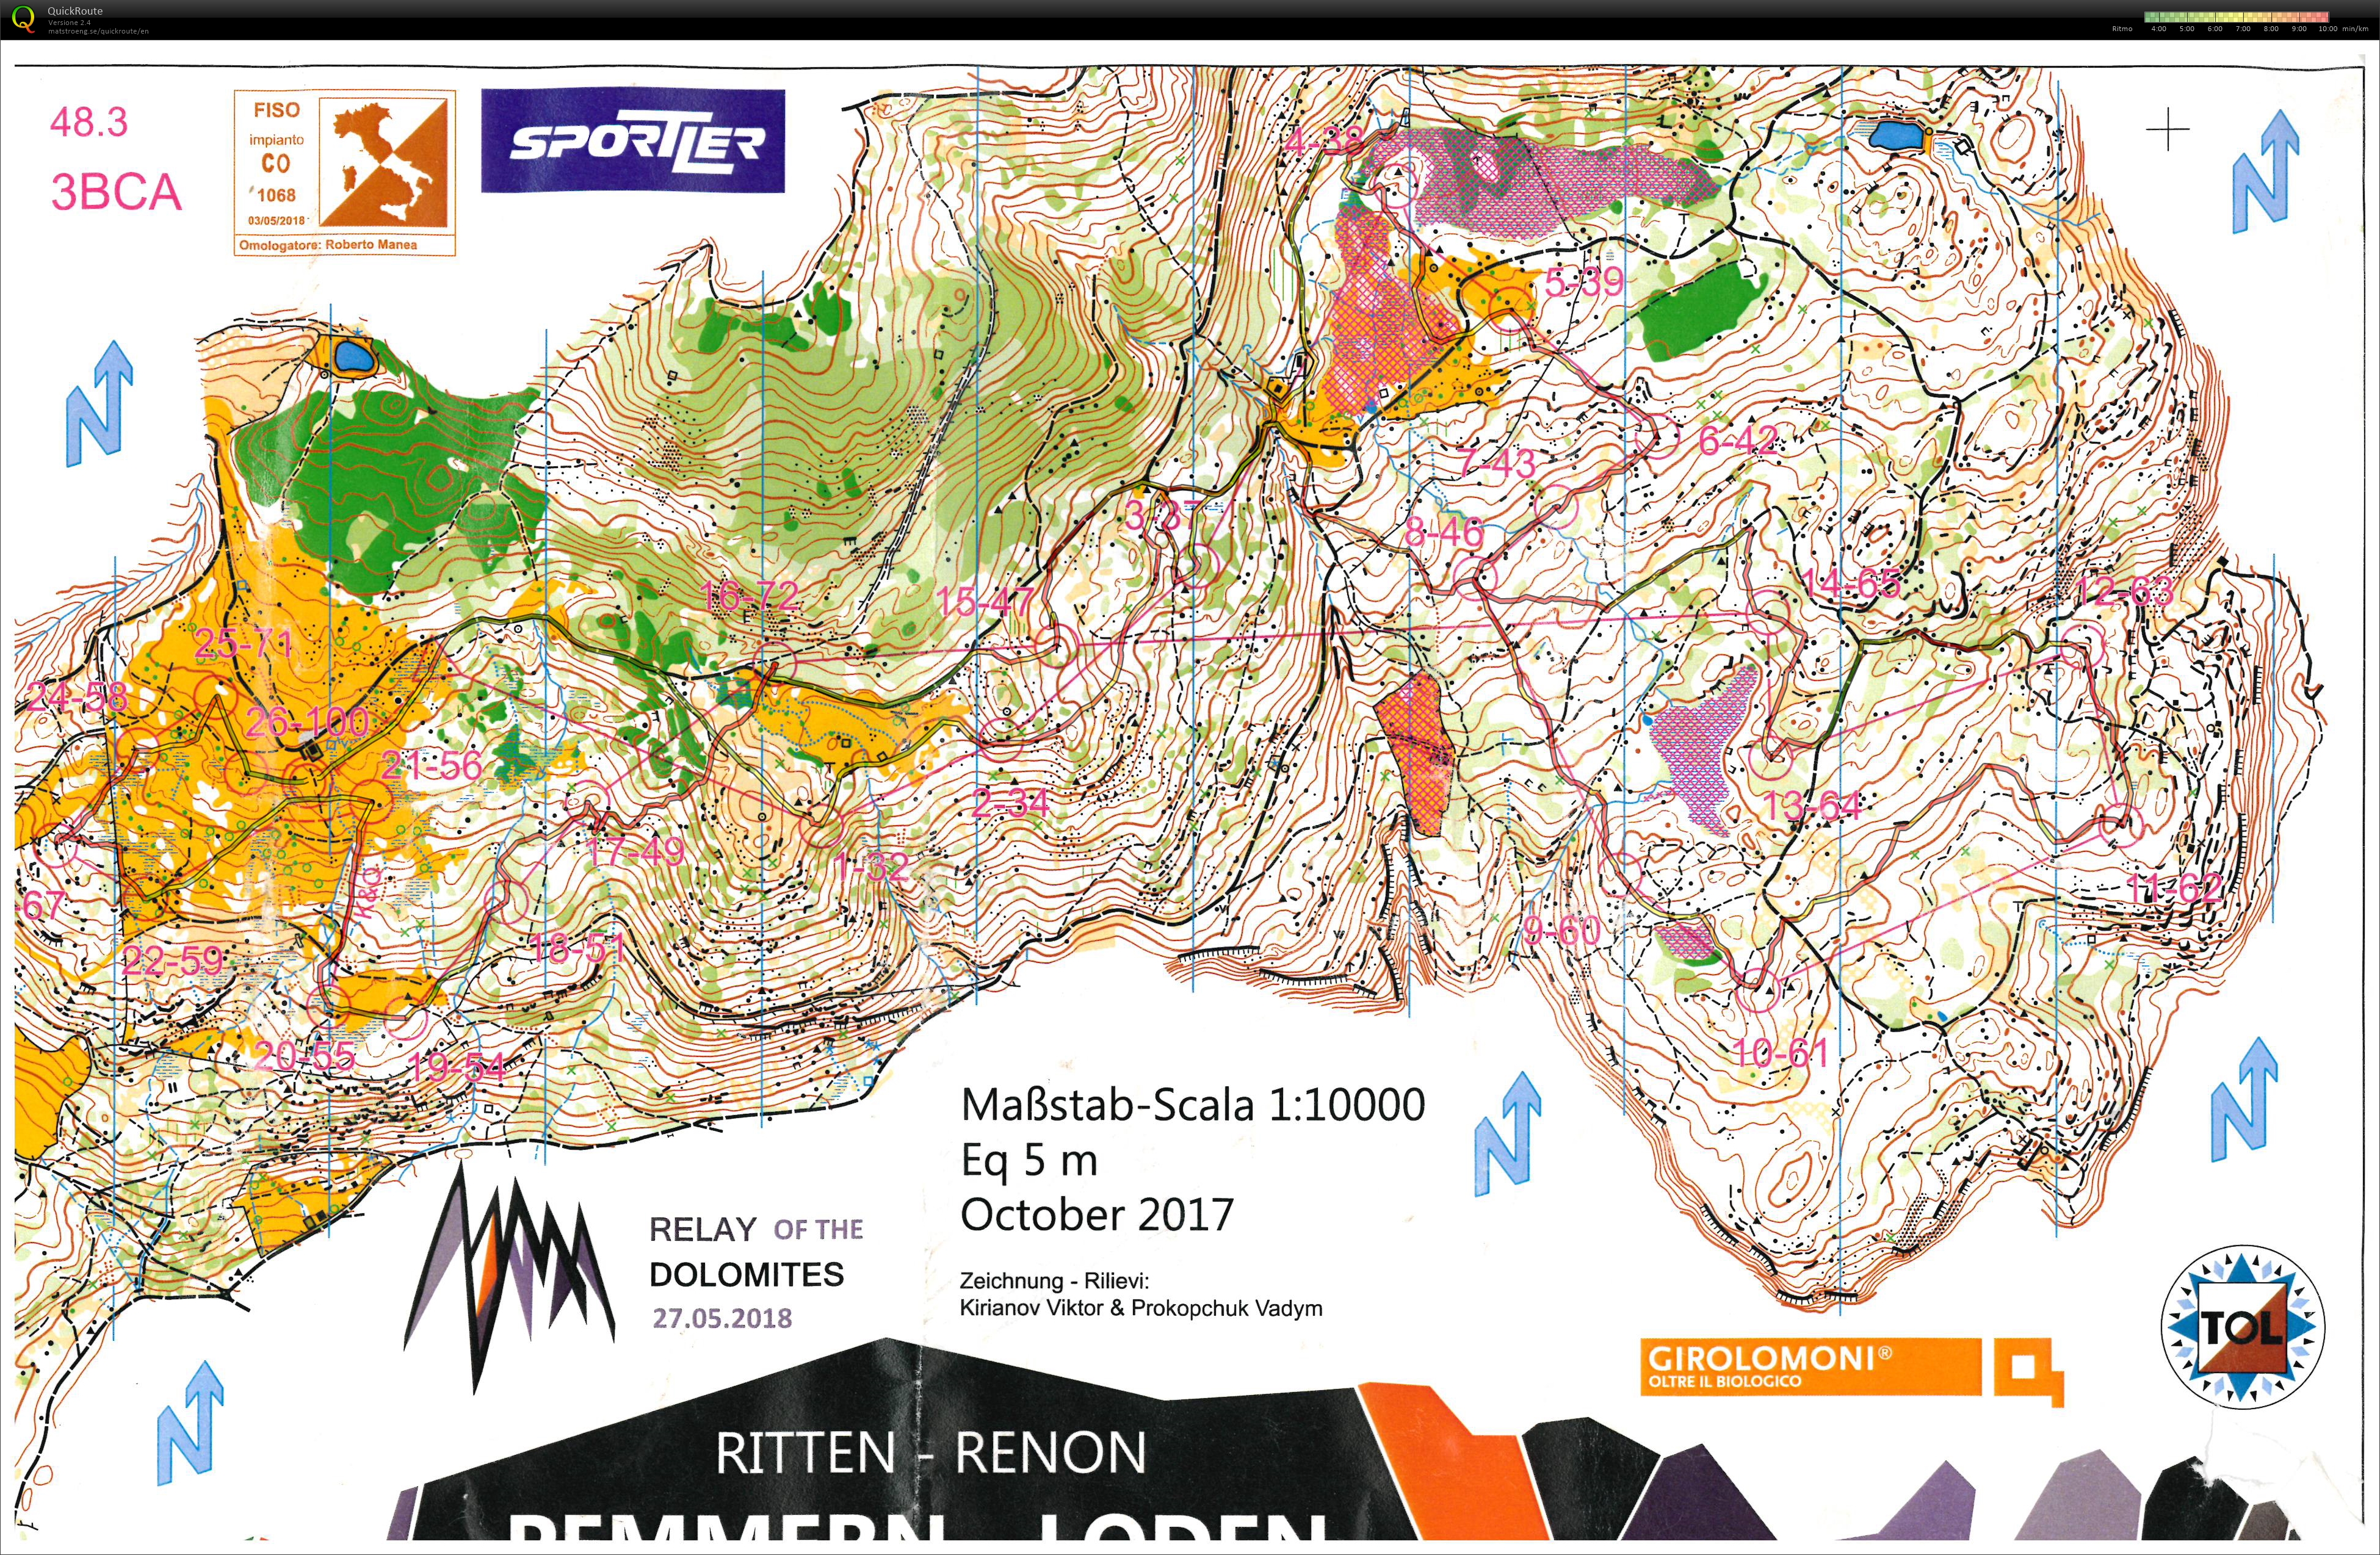 Relay of the Dolomites (2018-05-27)